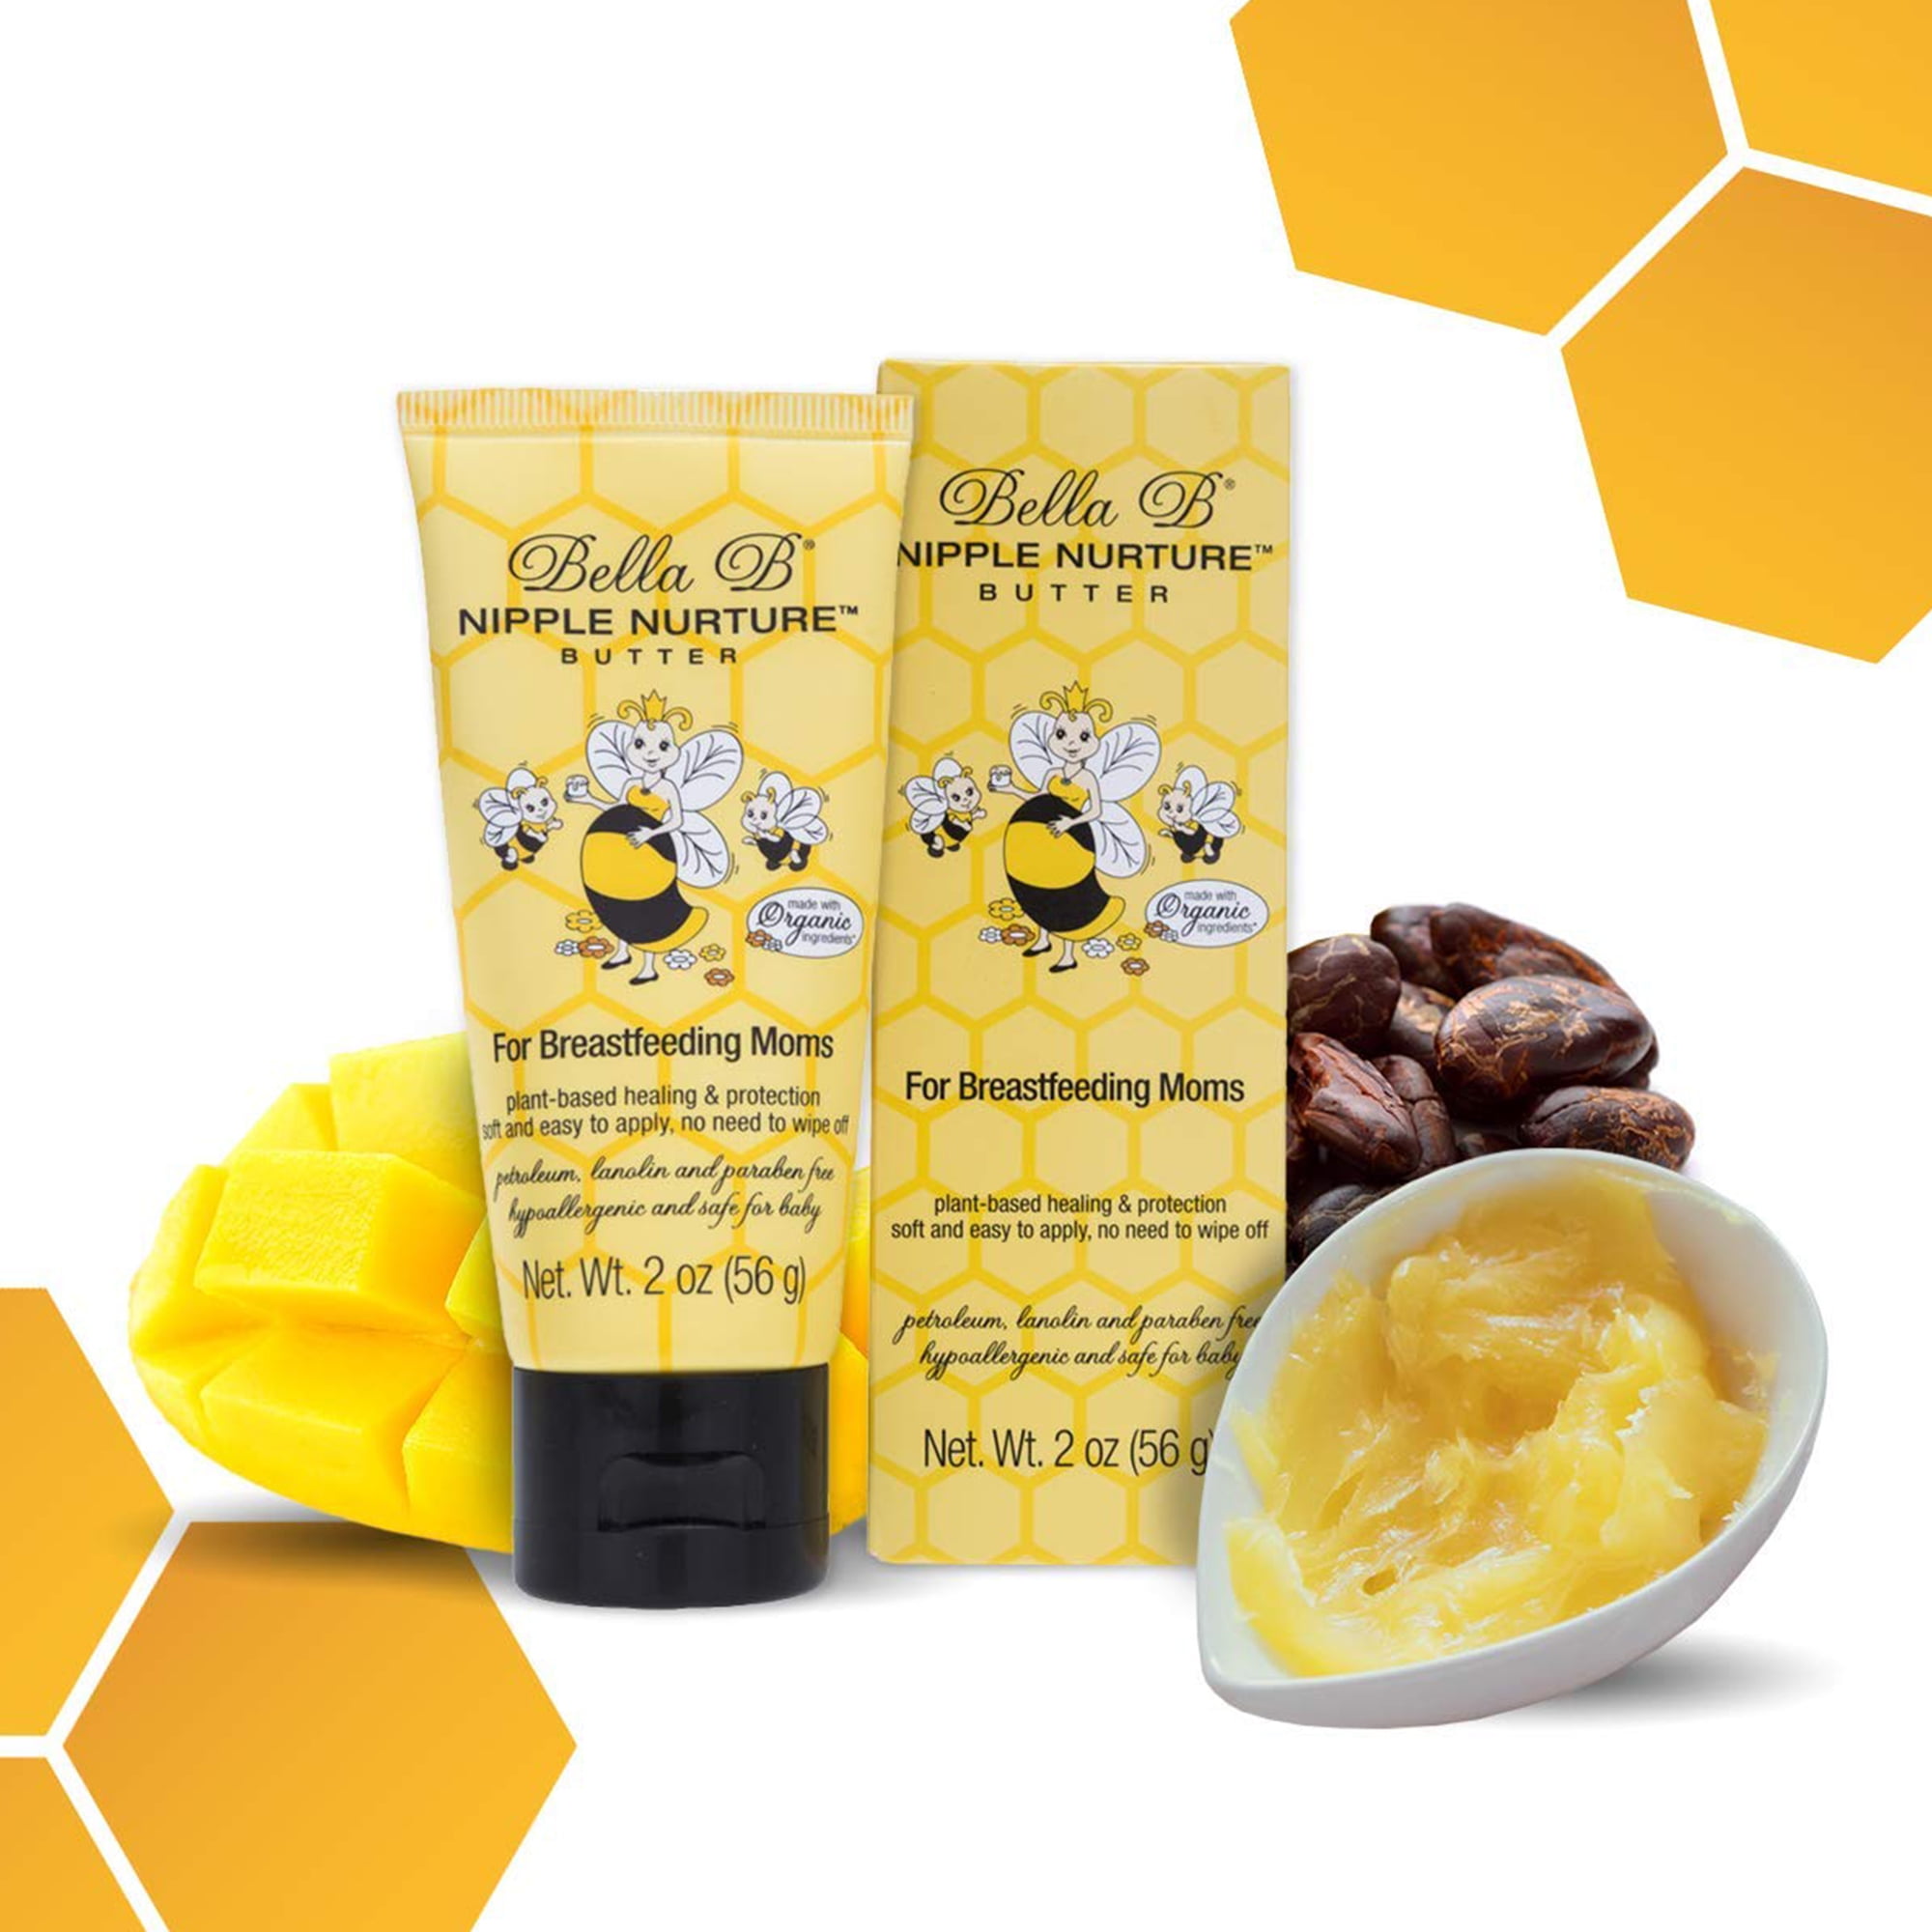 Medela Nipple Rescue Kit | Soothing Hydrogel Pads & Nipple Cream for  Breastfeeding, Includes 4 Ct Reusable Gel Pads & Purelan Lanolin, Relief  for Sore